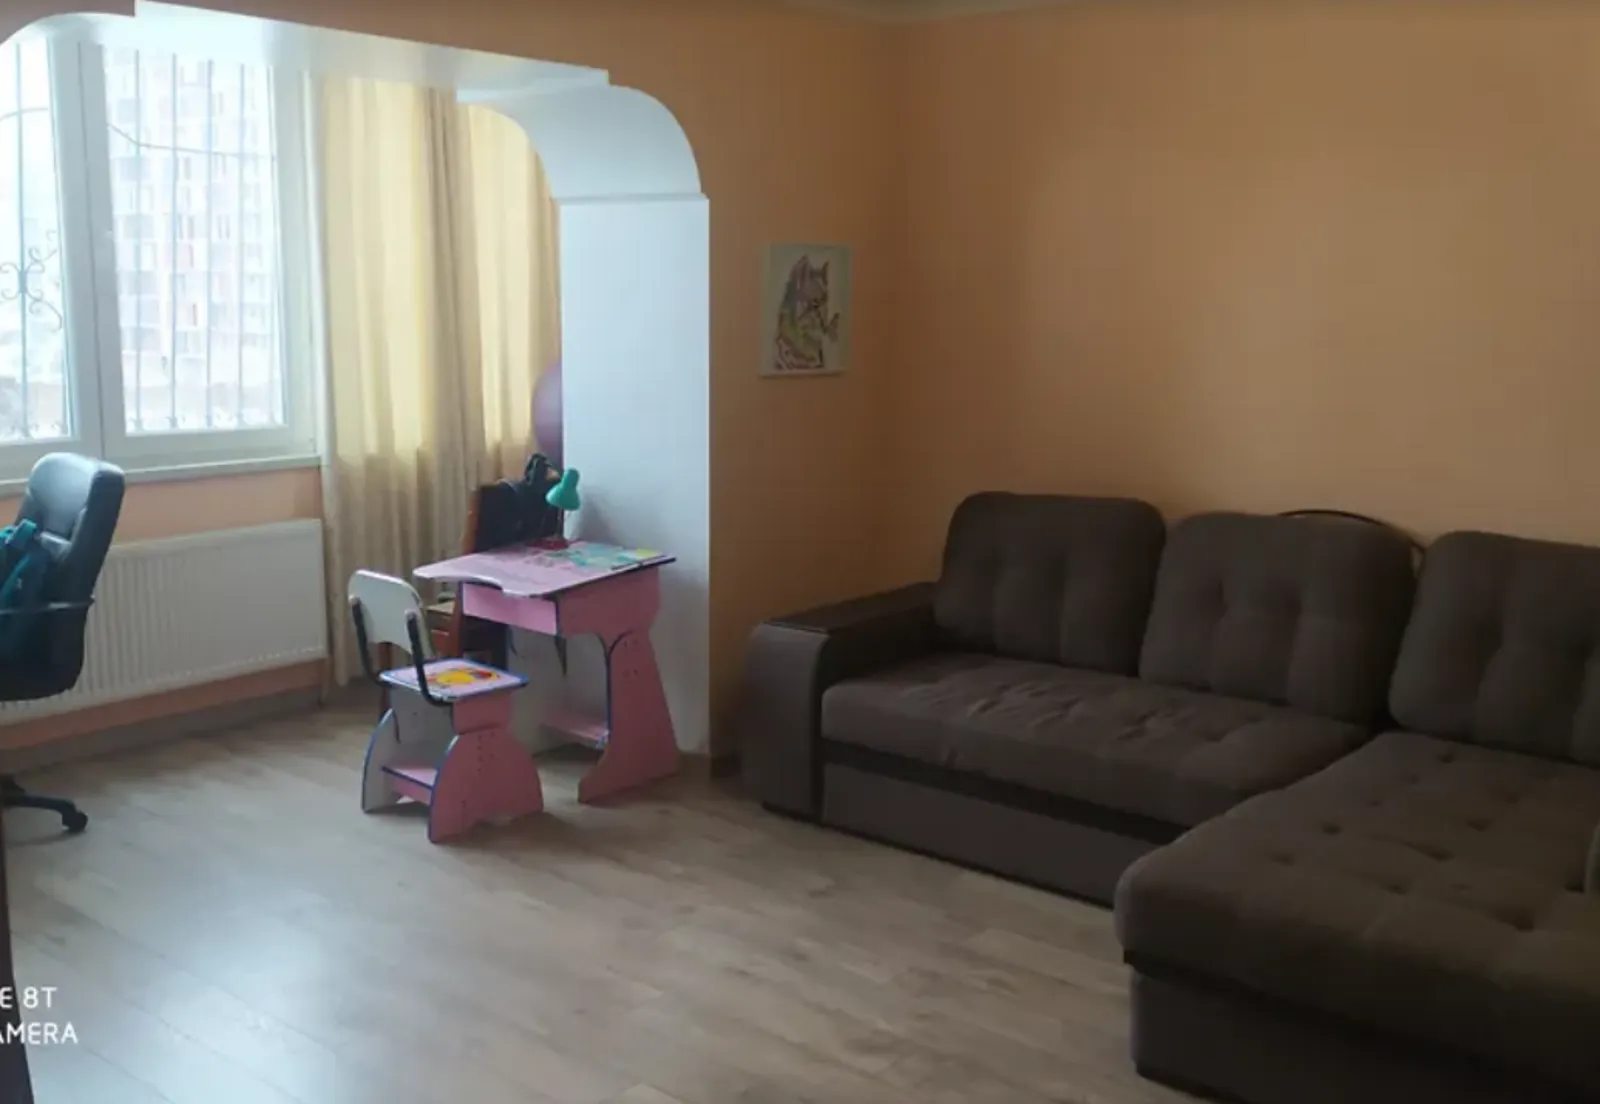 Apartments for sale. 2 rooms, 69 m², 1st floor/5 floors. Bam, Ternopil. 